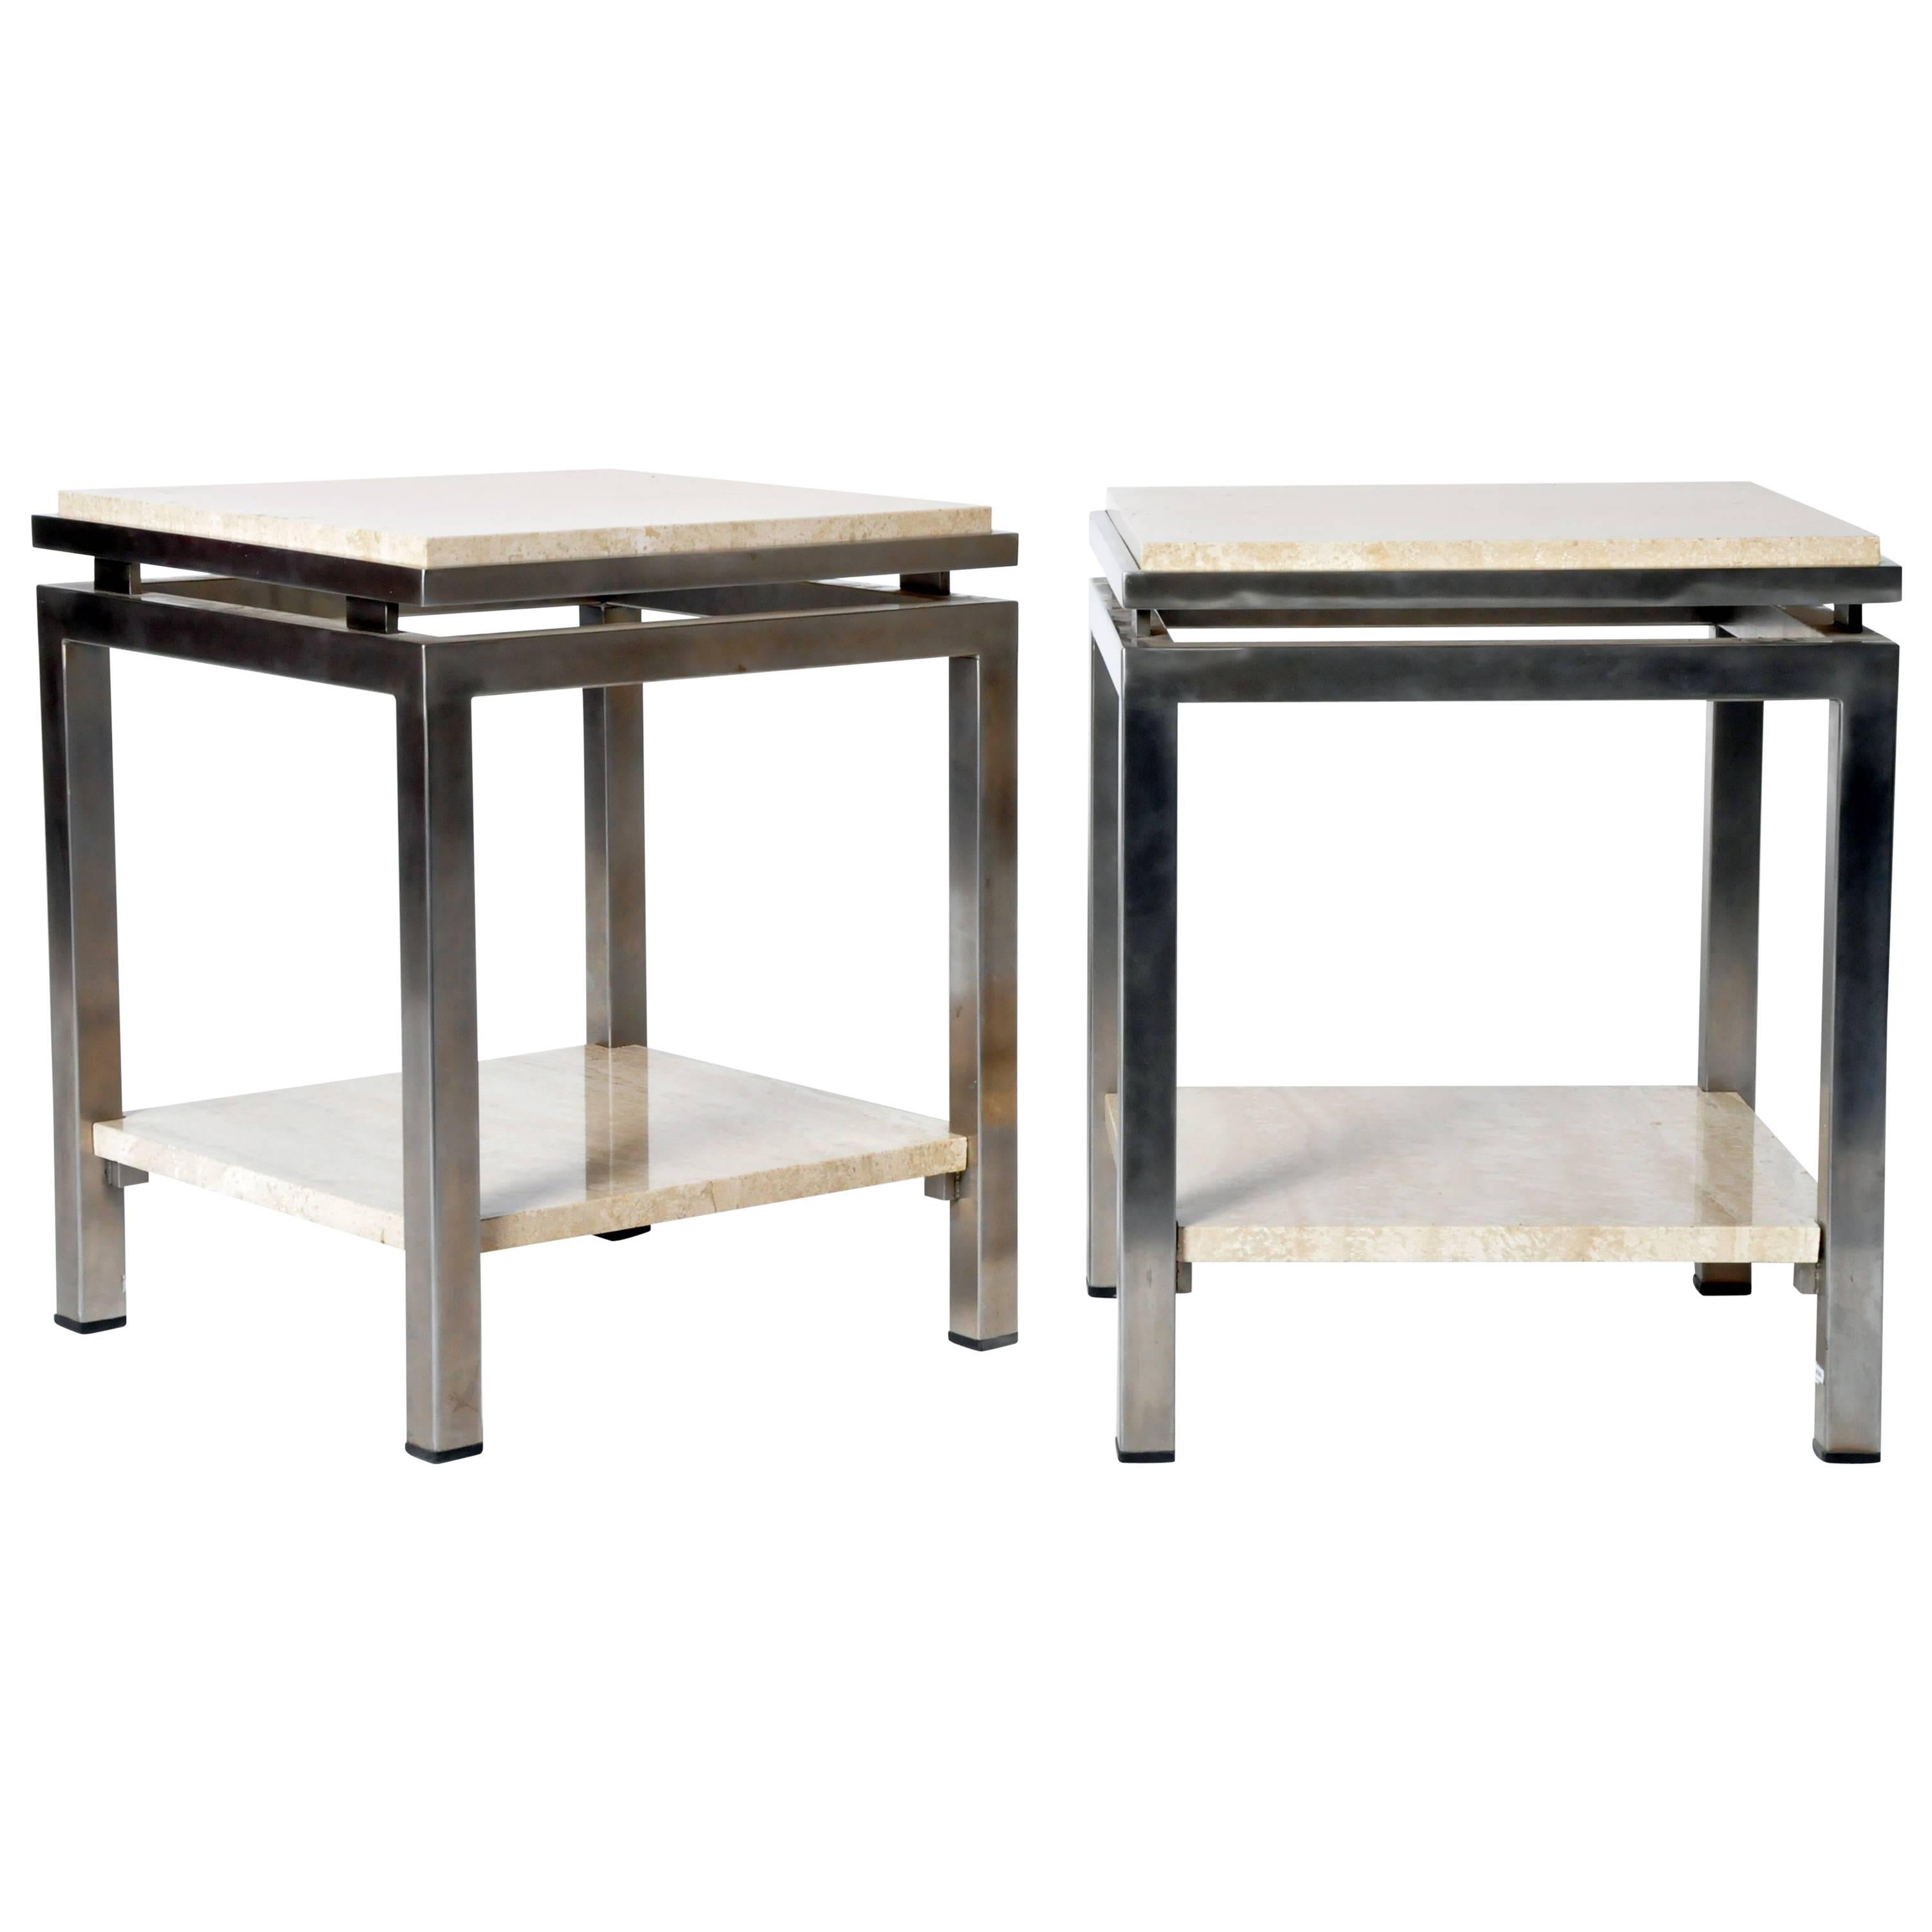 Pair of Two-Tier Travertine Side Tables in the Style of Guy Lefevre